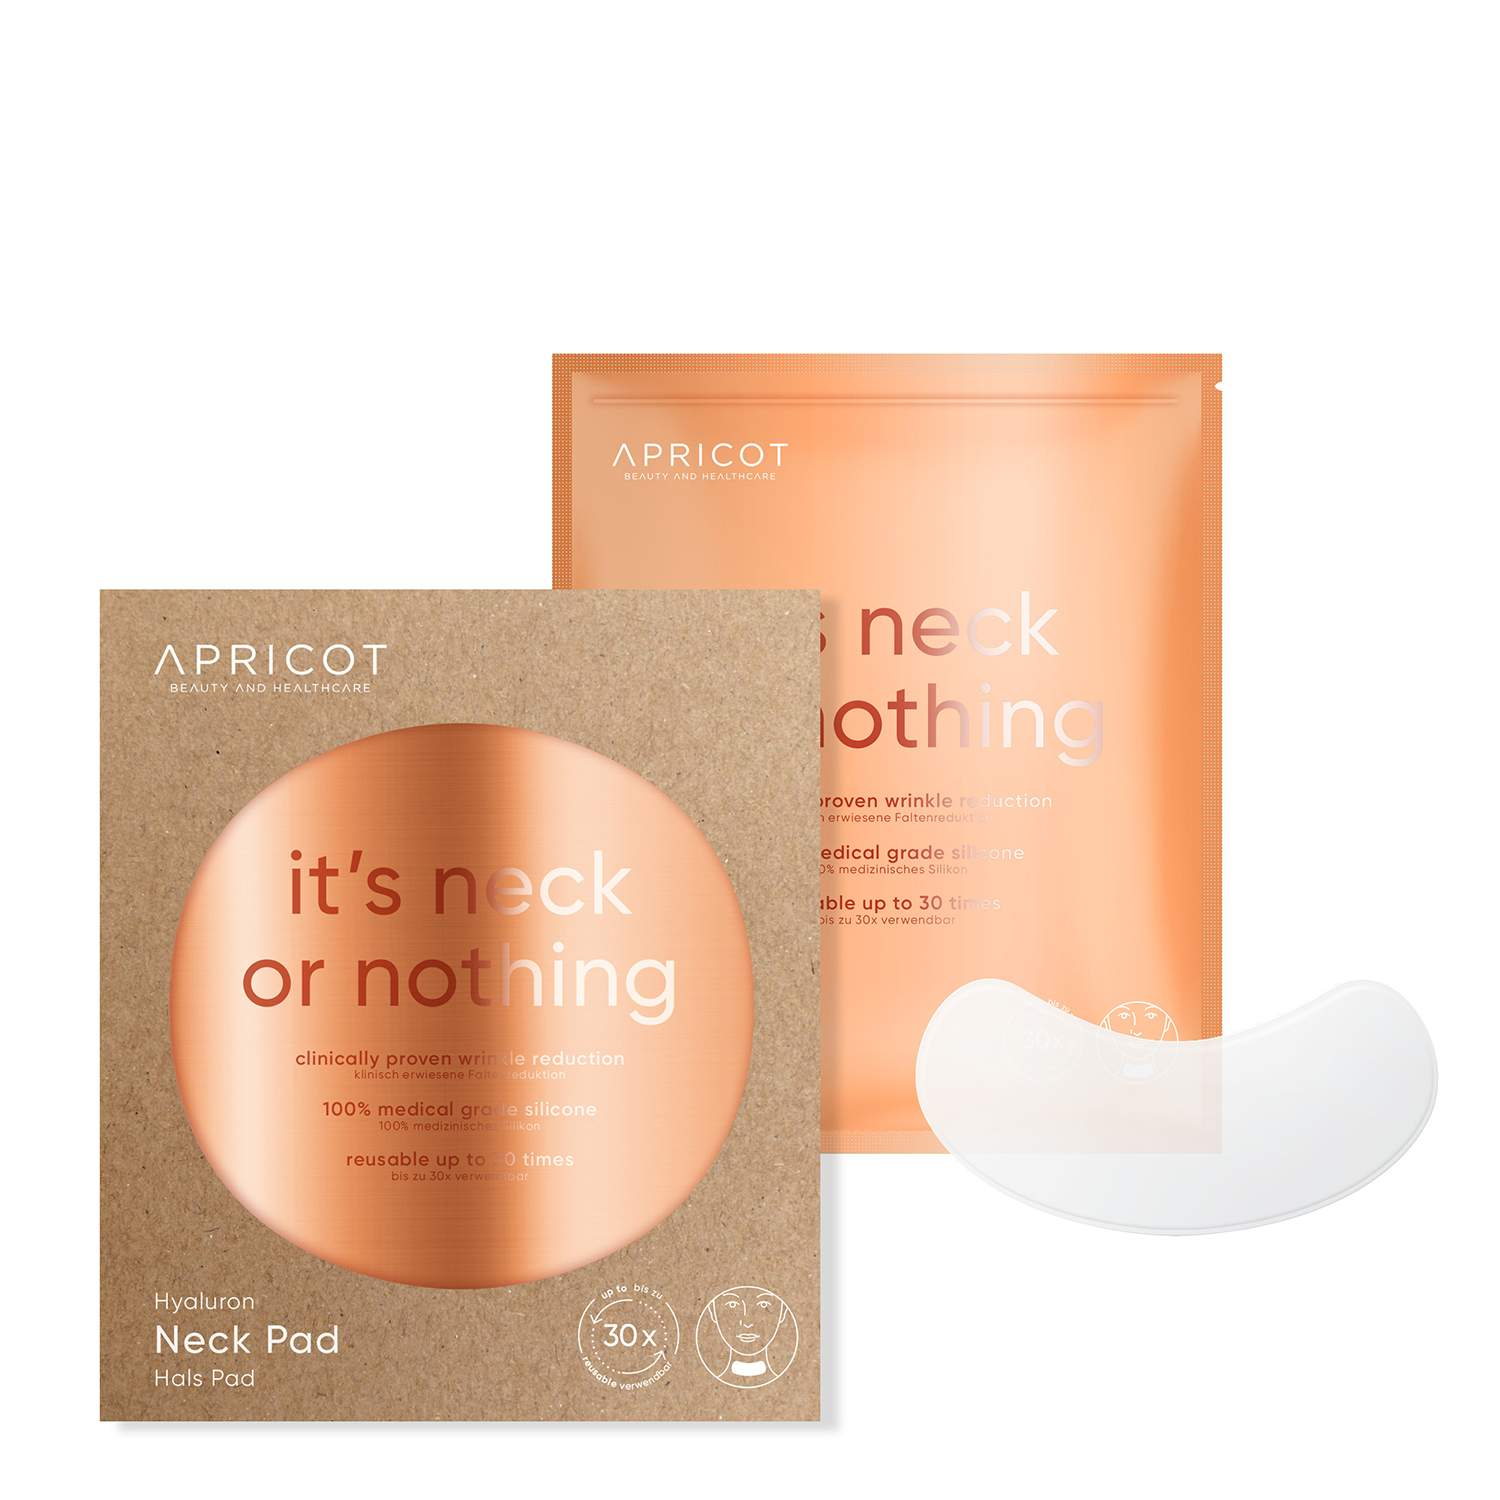 Apricot Beauty It's Neck Or Nothing Pad Apricot Beauty It's Neck Or Nothing Pad 1